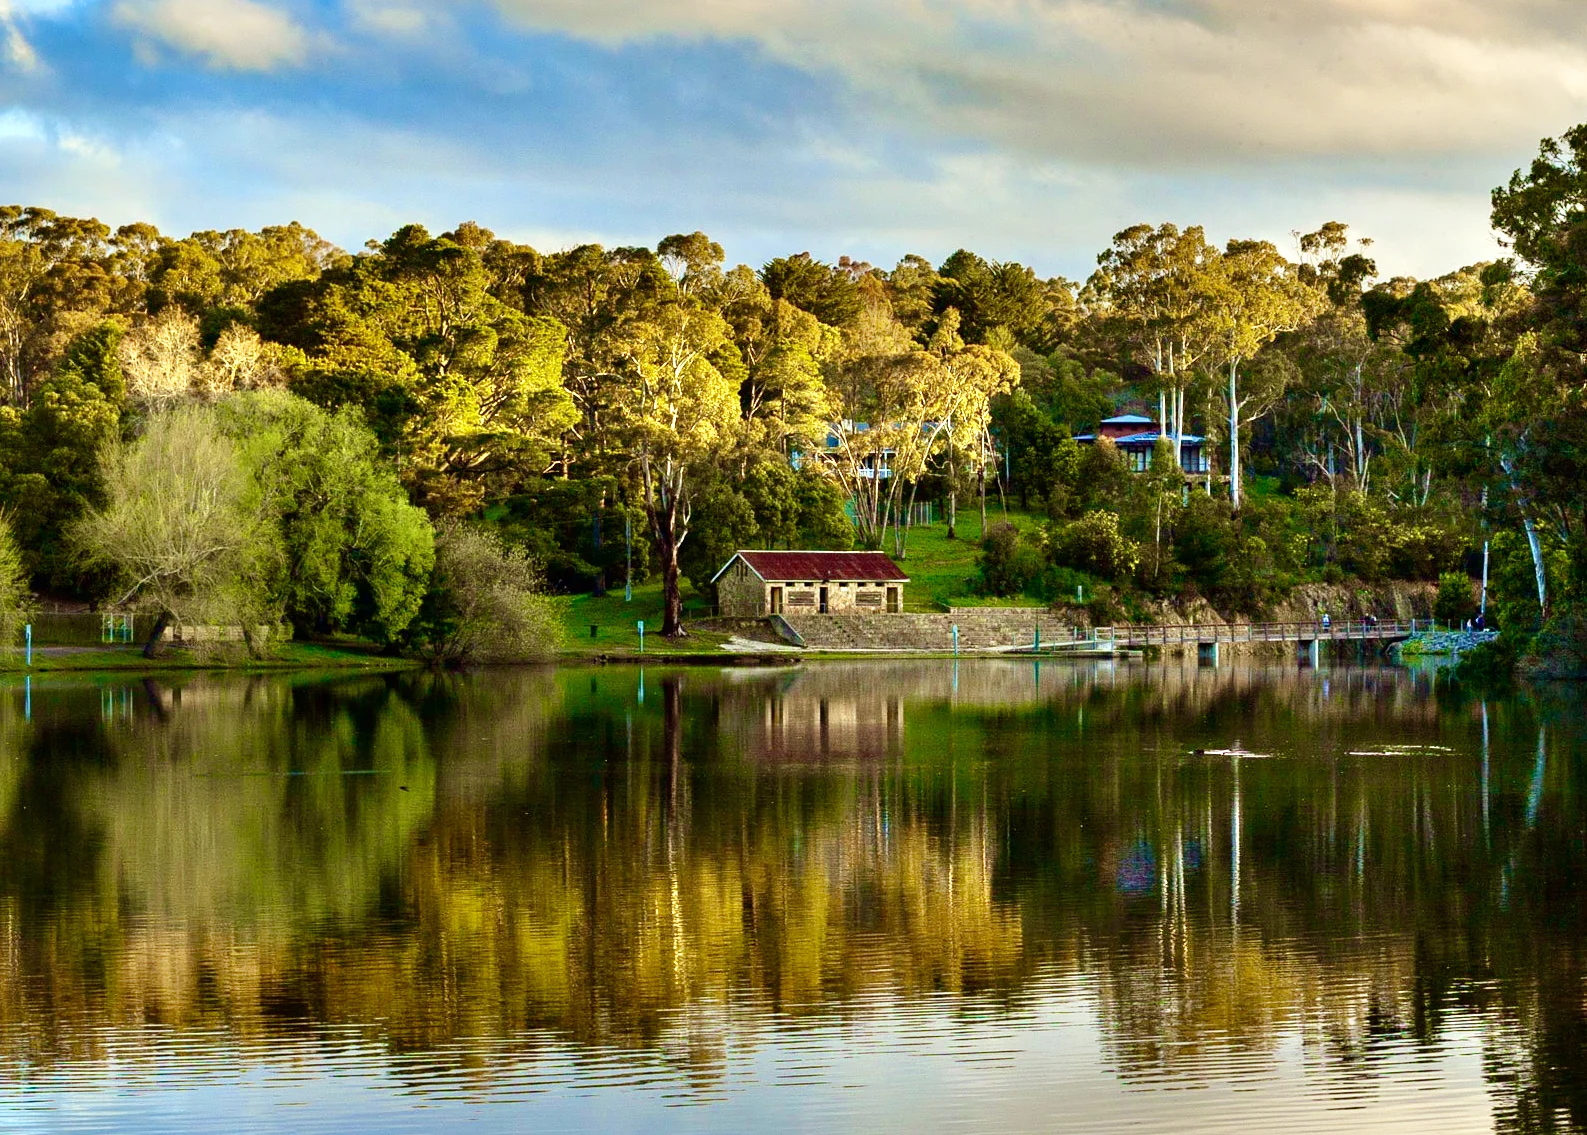 Lake Daylesford with swimming precinct and change rooms